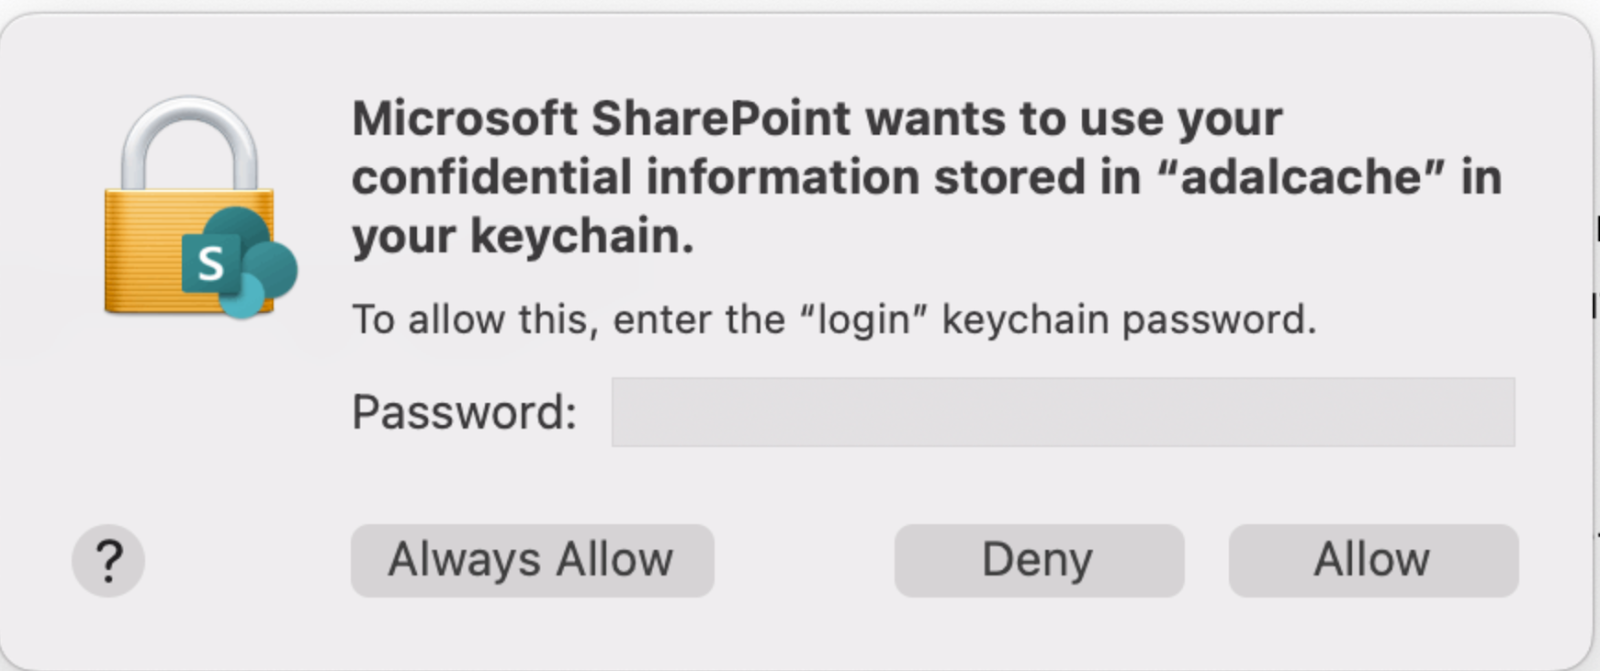 Microsoft SharePoint Wants to Use Your Confidential 